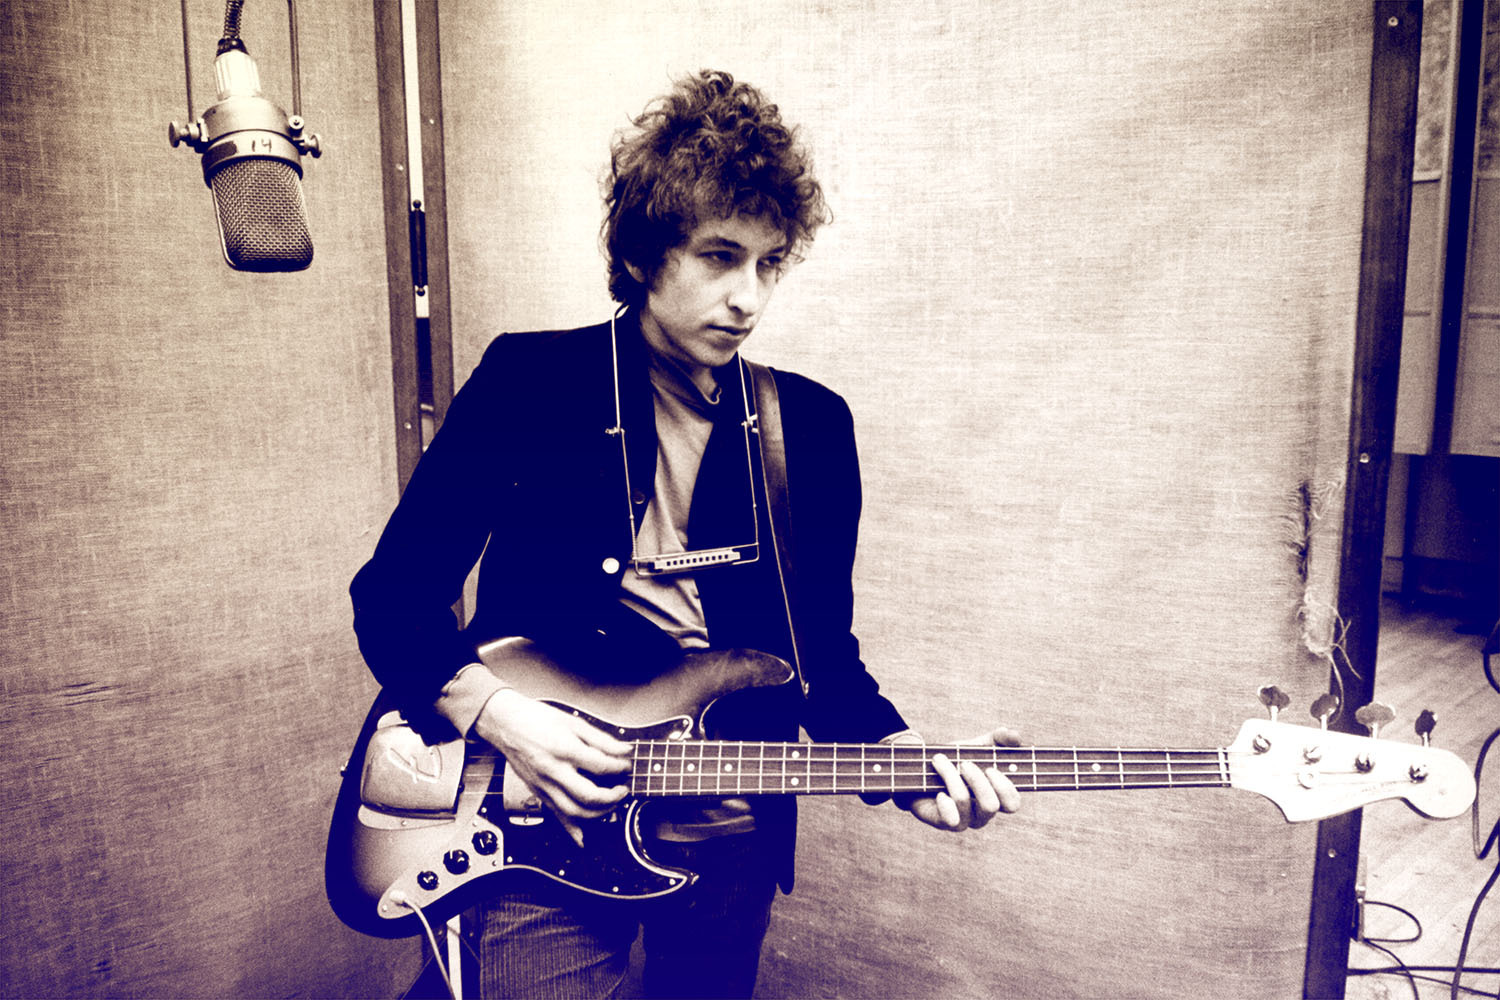 What We Can Learn From Bob Dylan’s Style